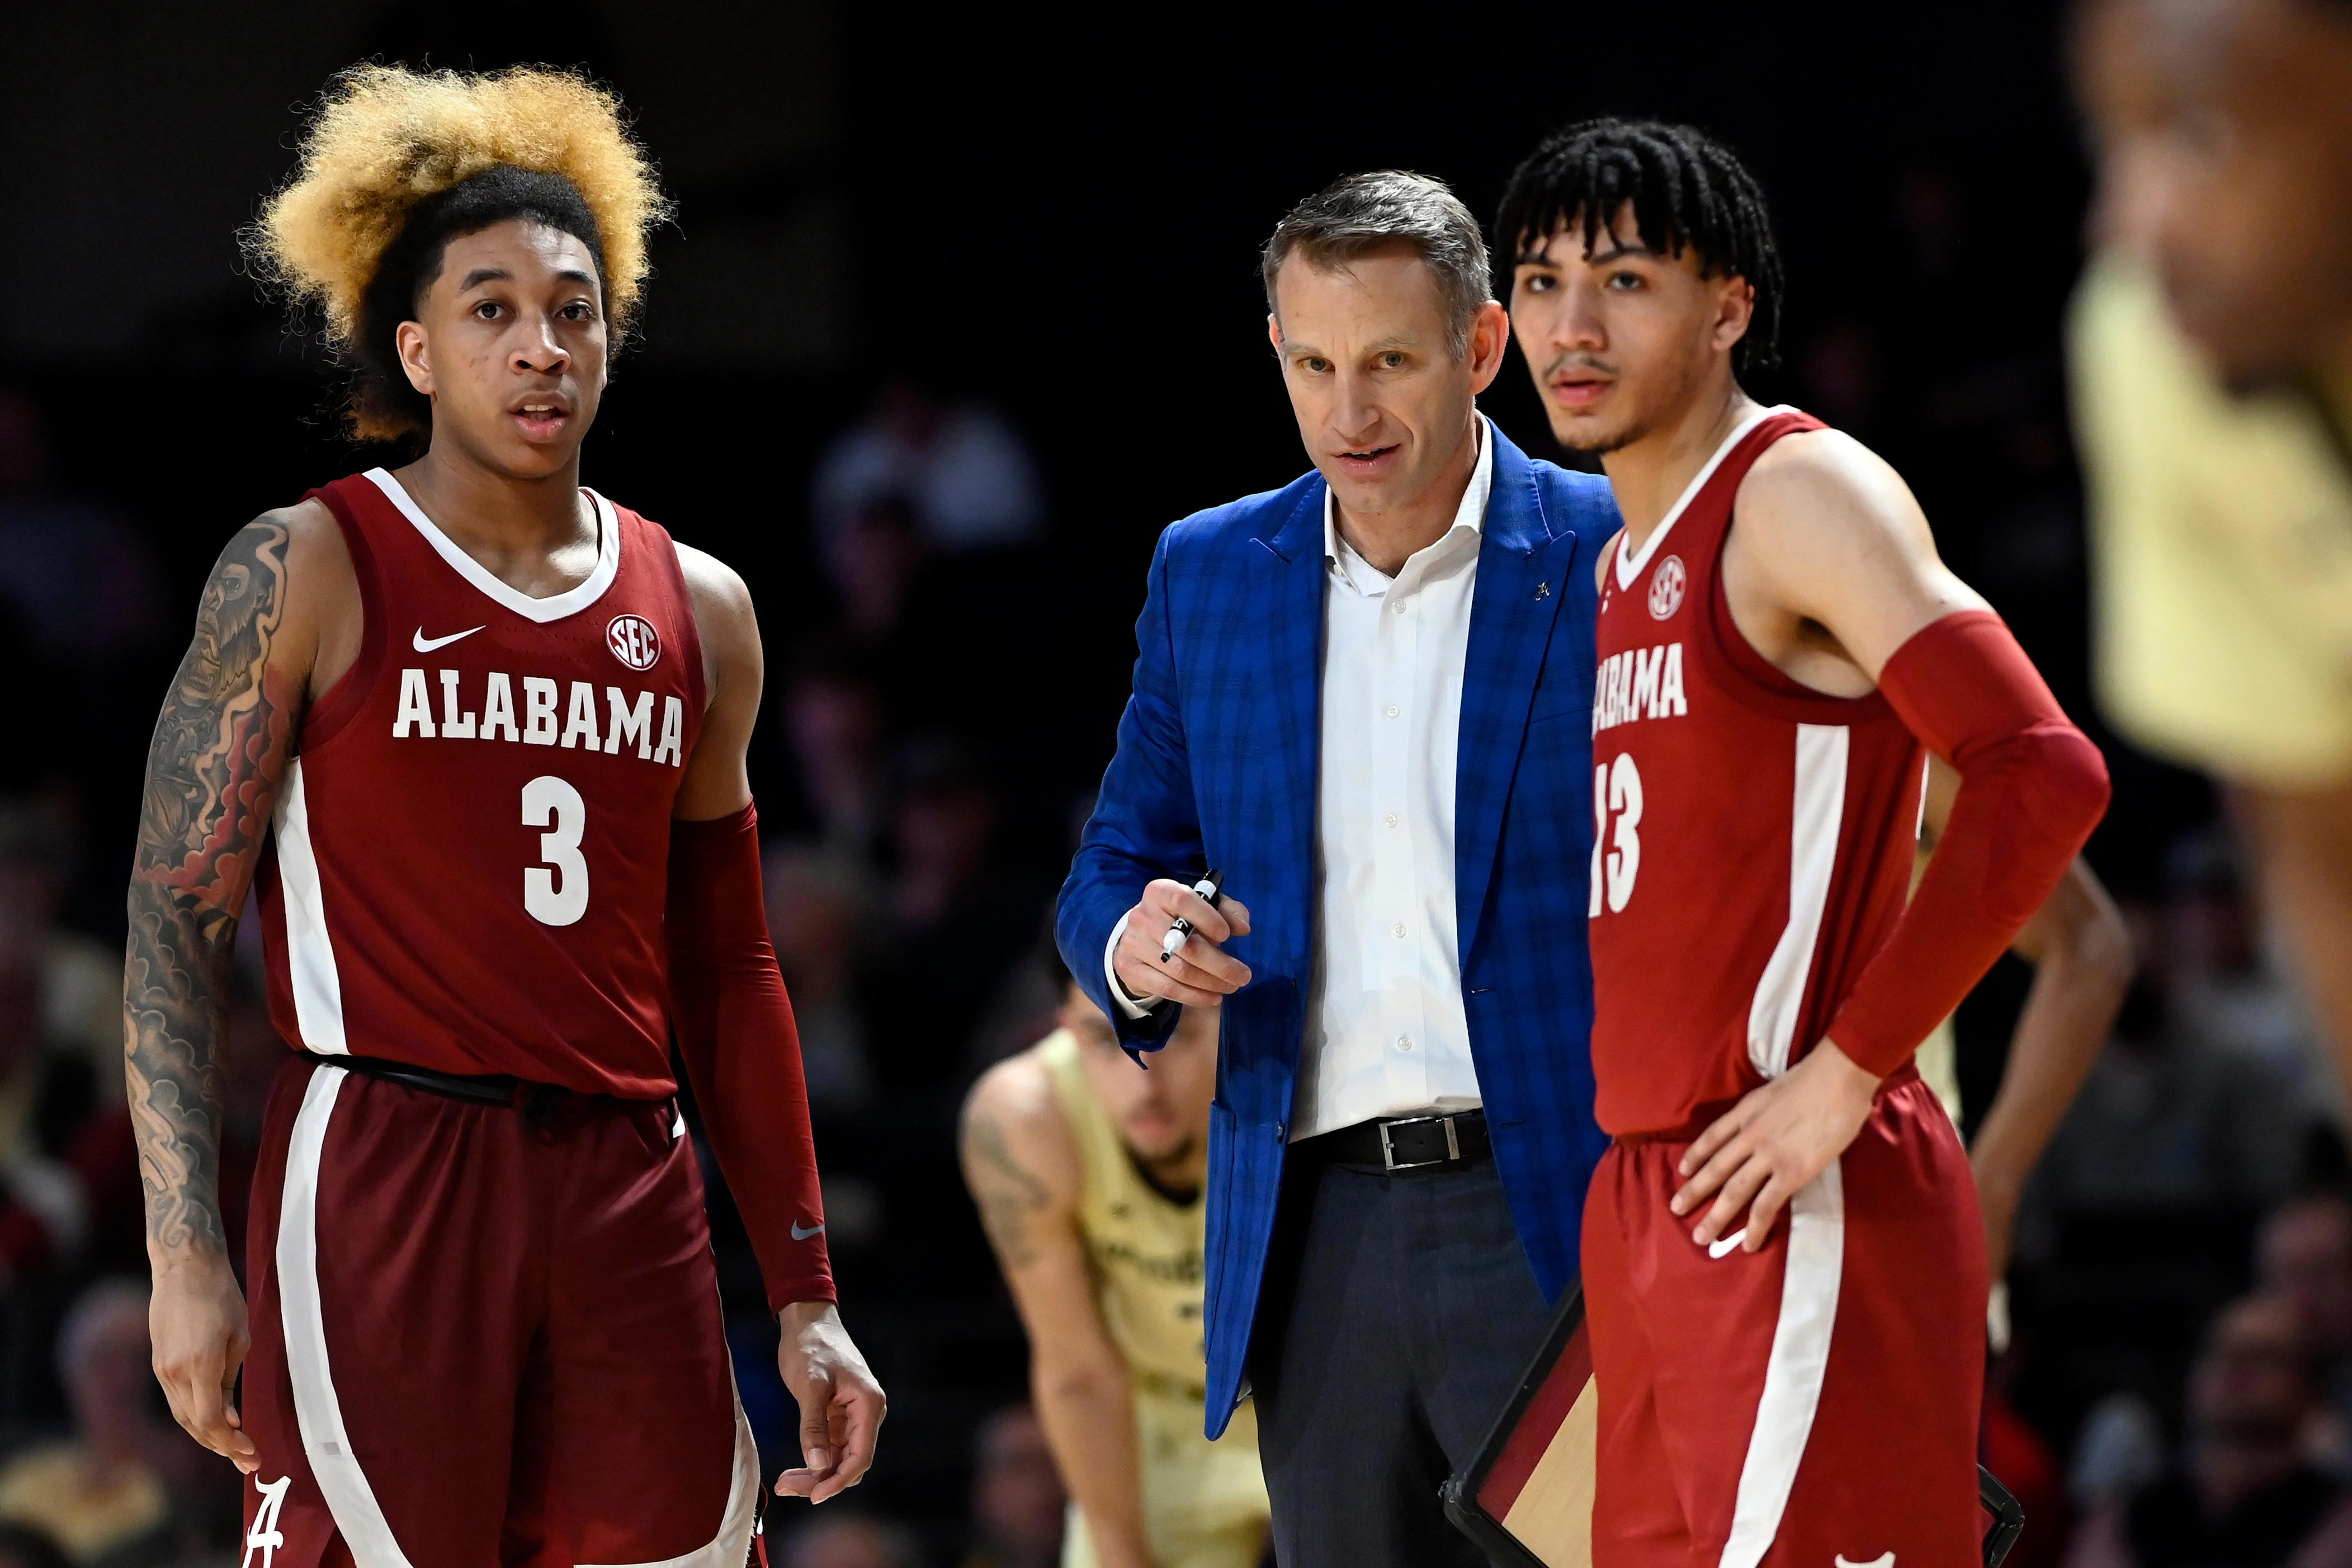 Nate Oats wasn't taking shot at Jahvon Quinerly at SEC Media Day: 'All ...